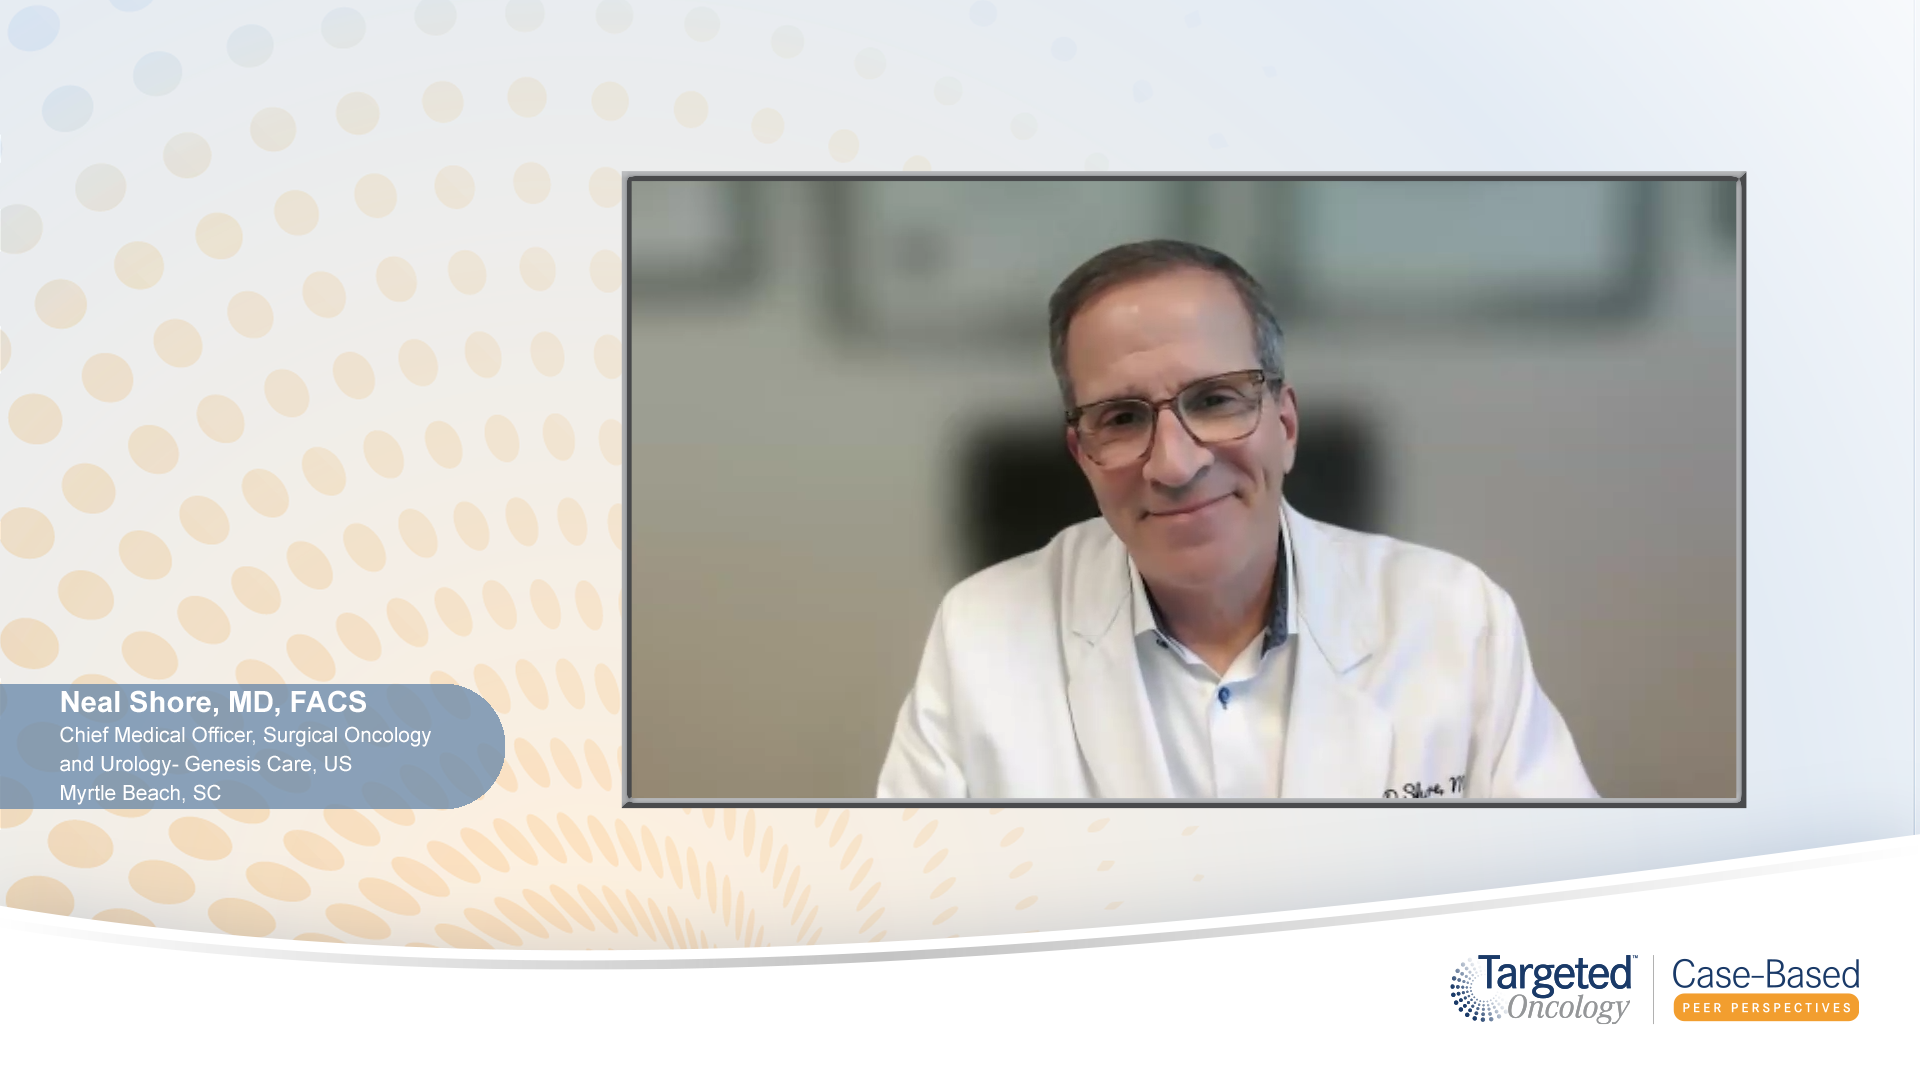 Video 3 - "Treatment Intensification in Metastatic Prostate Cancer"